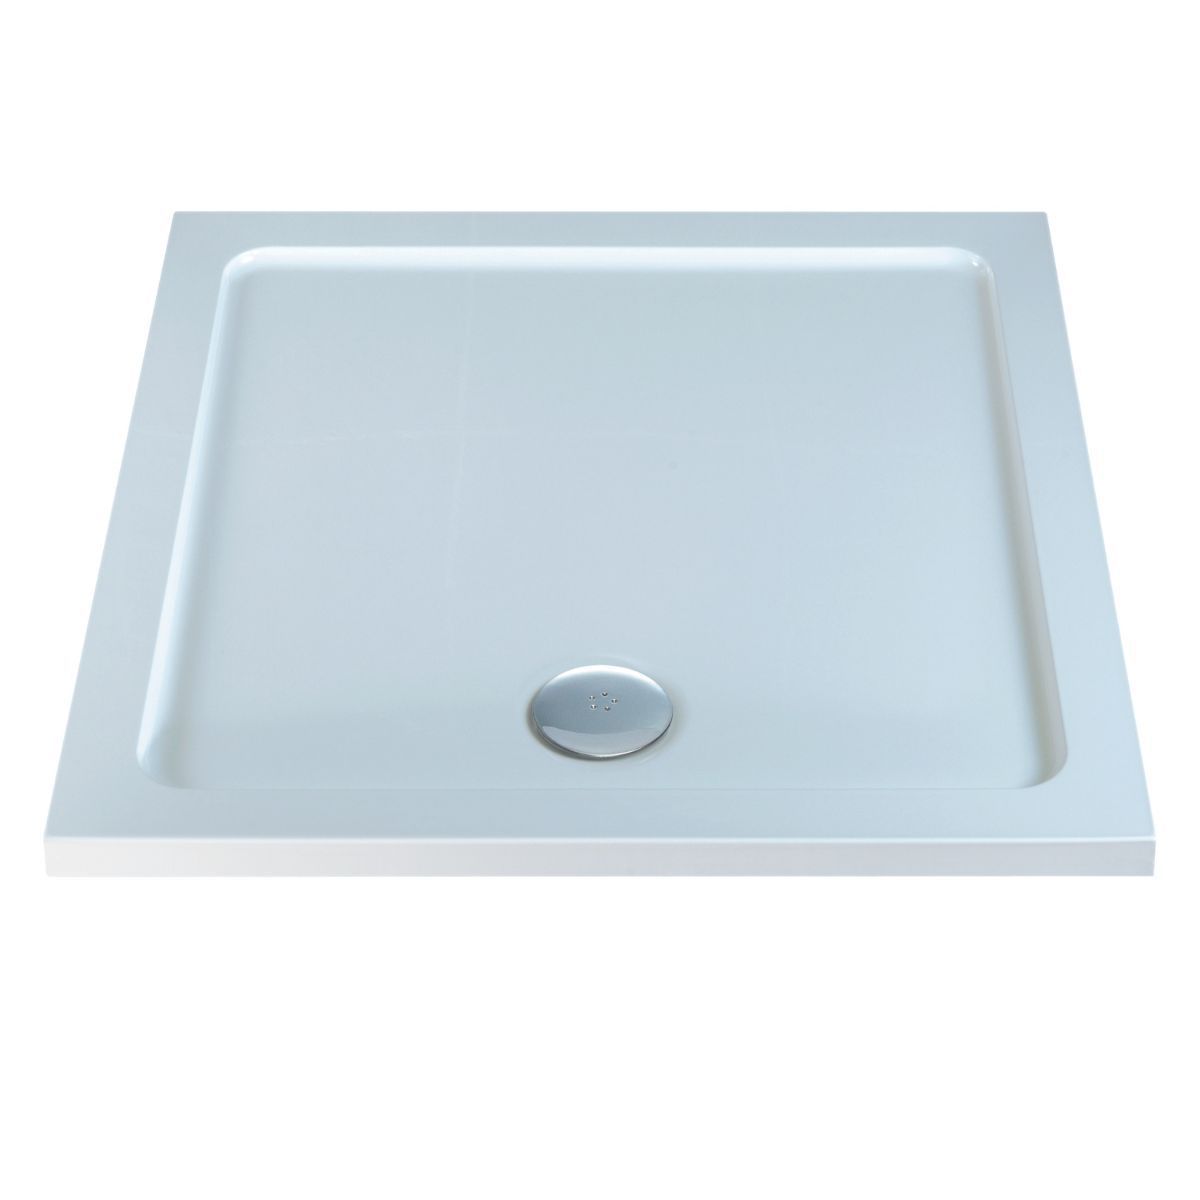 MX Stone Resin Shower Tray - Square 800 x 800mm - White